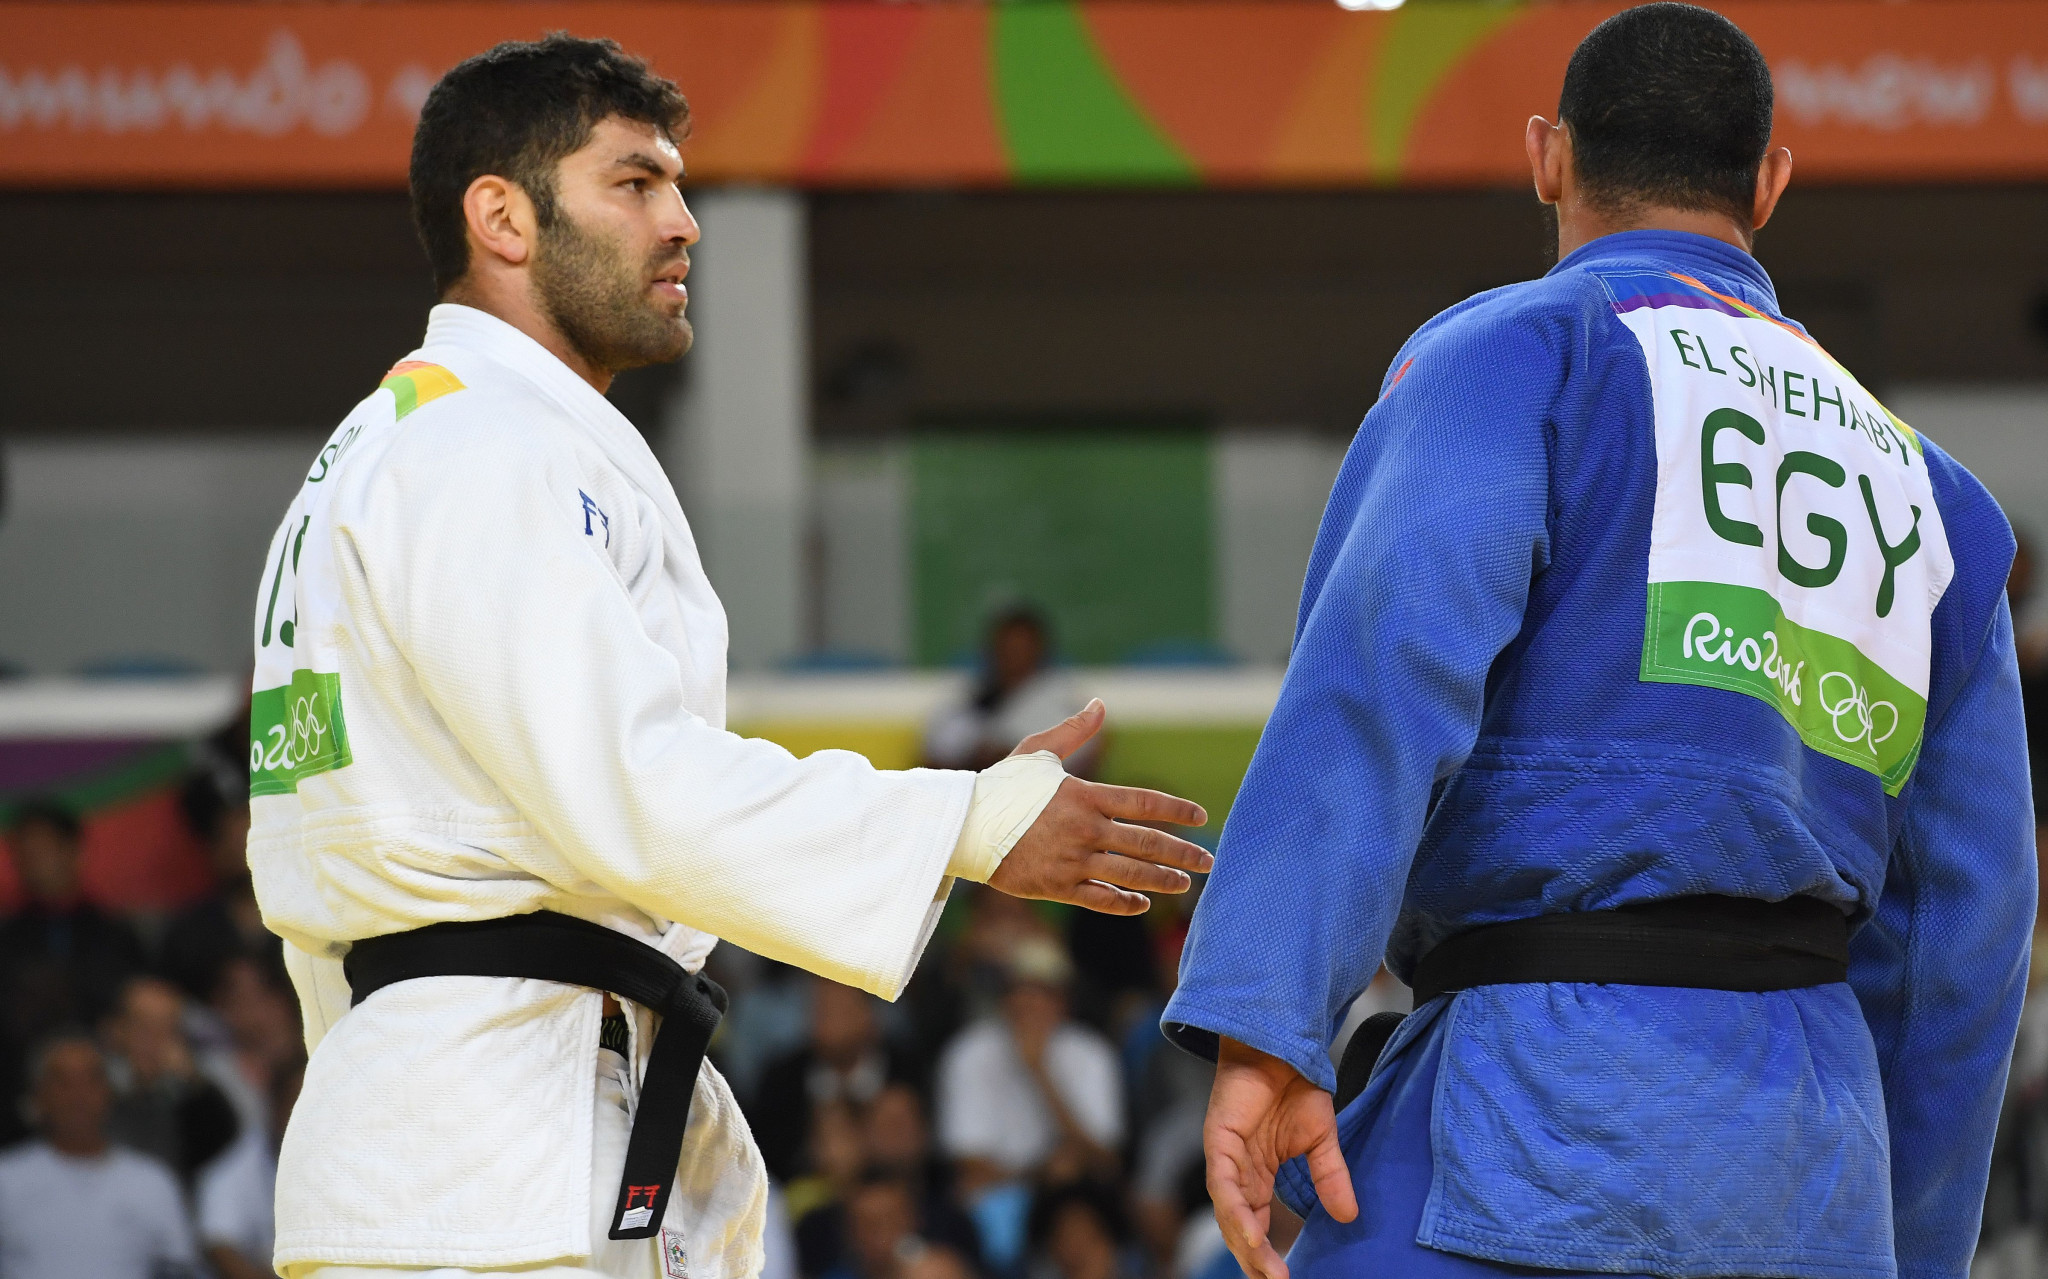 Egyptian judoka Islam El Shehaby refused to shake the hand of bronze medallist Or Sasson following a preliminary round loss at under 100 kilograms at Rio 2016 ©Getty Images